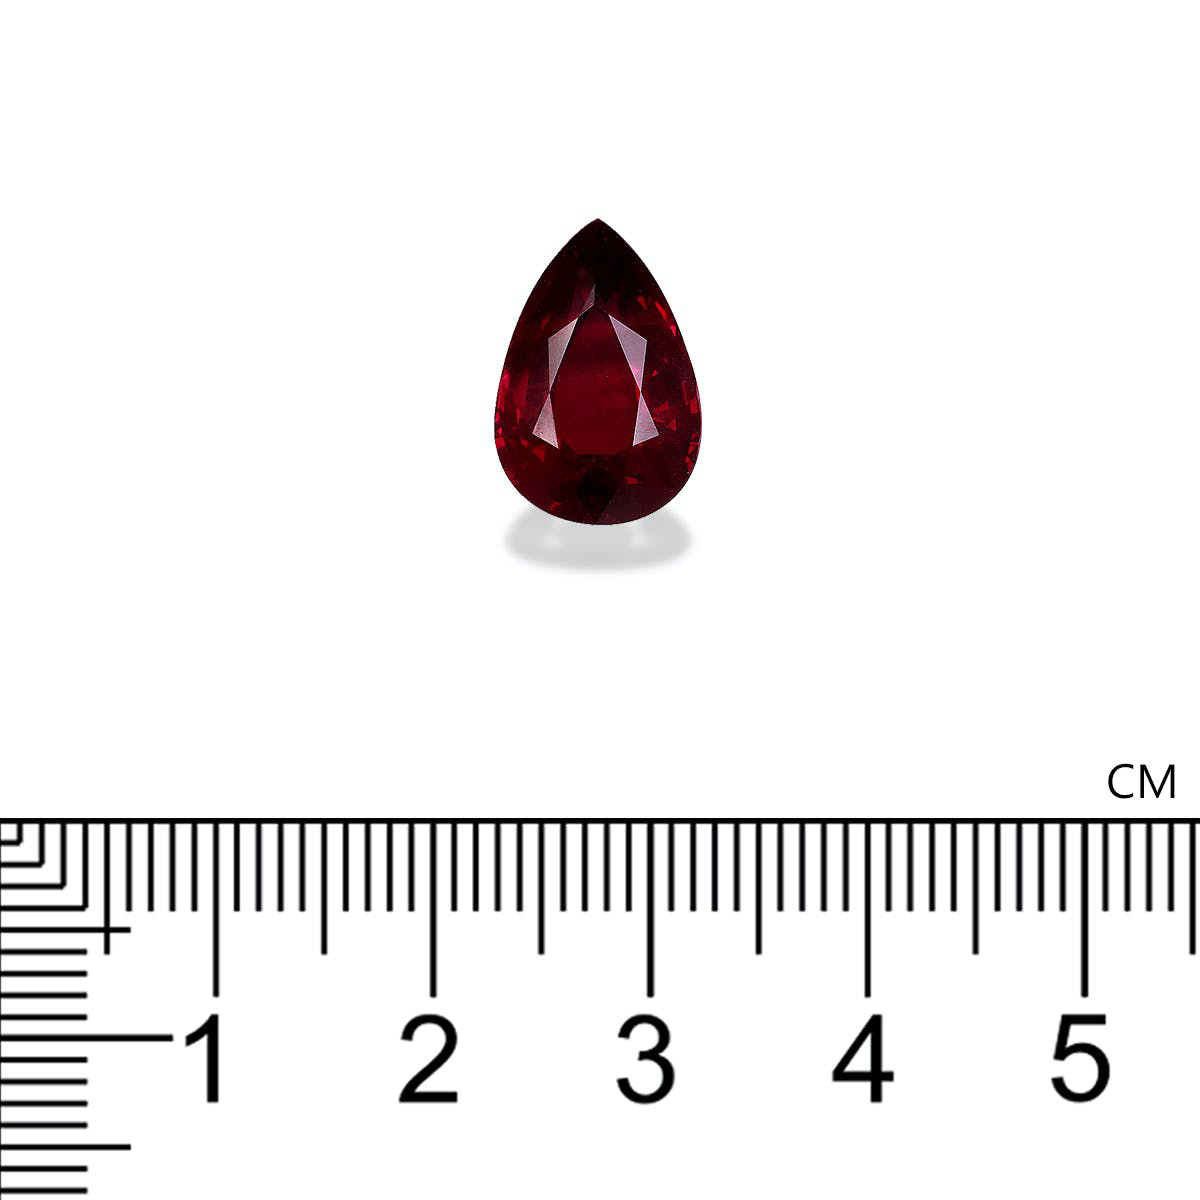 Picture of Pigeons Blood Unheated Mozambique Ruby 7.10ct (SA44-06)